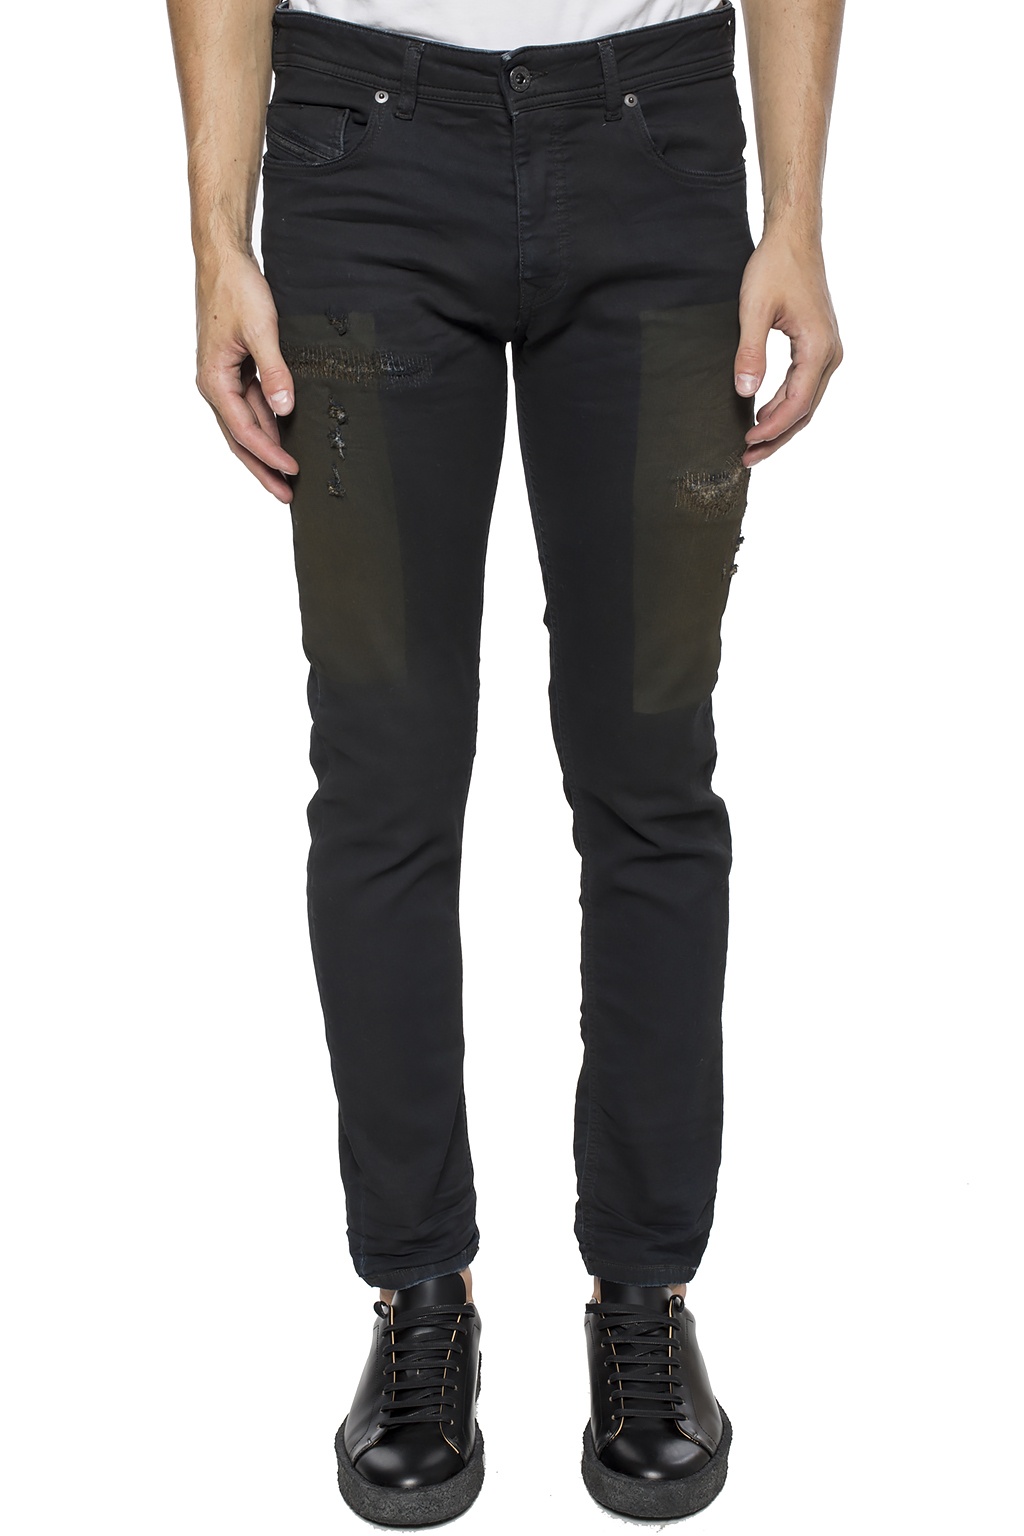 Diesel Black Gold Jeans with stitching | Men's Clothing | Vitkac